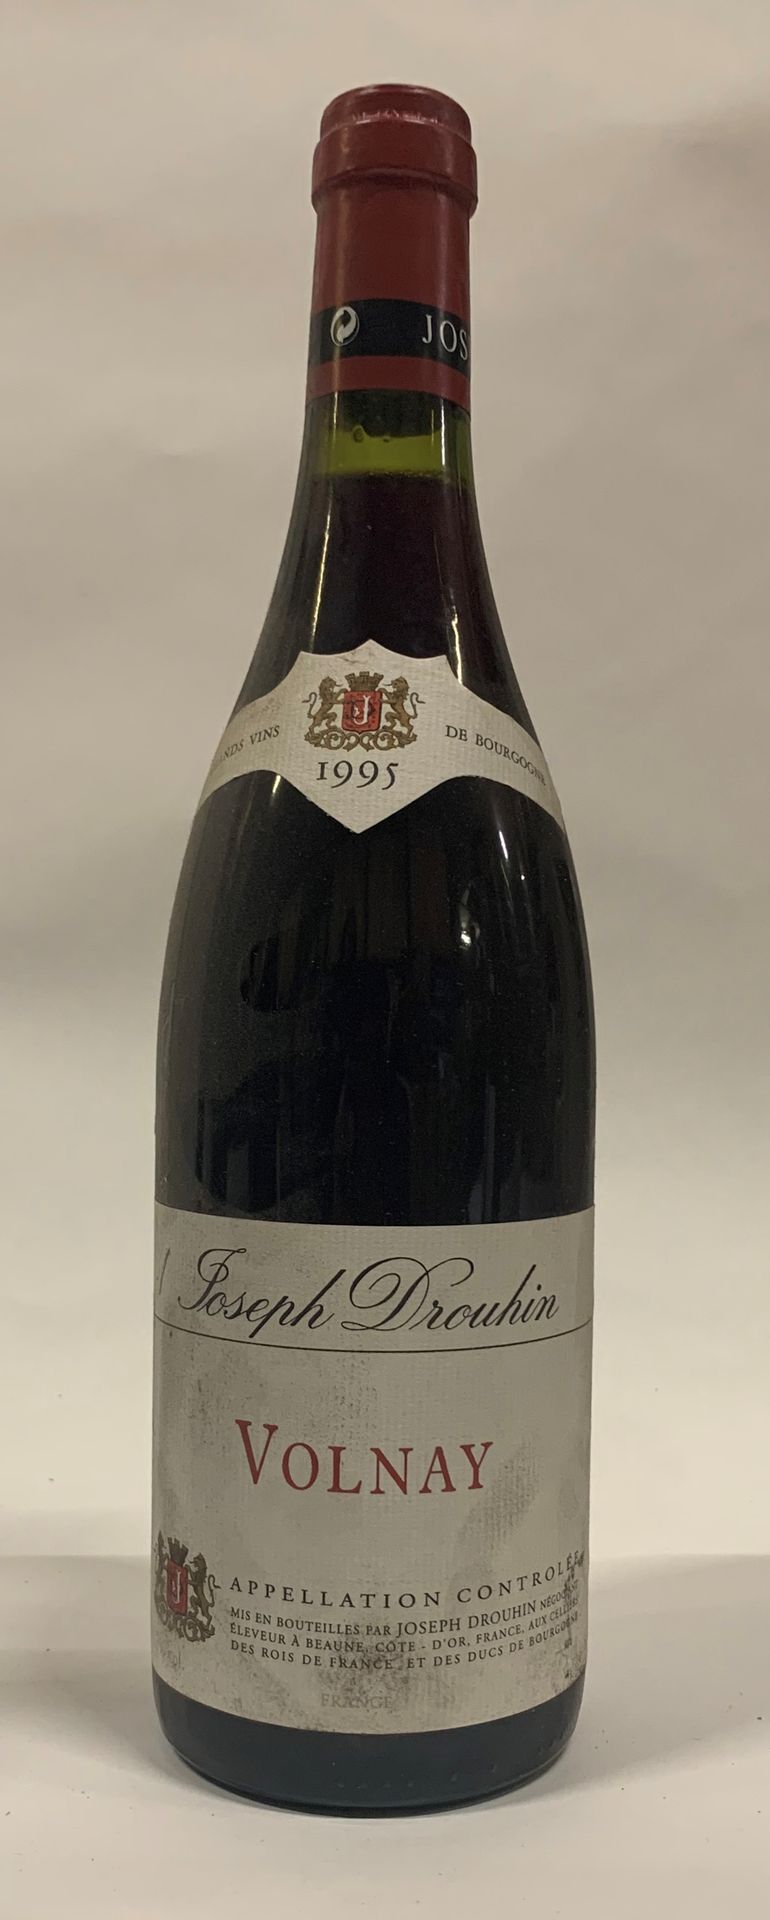 Null ● VOLNAY | Joseph Drouhin, 1995

4 bouteilles

Réf. 7